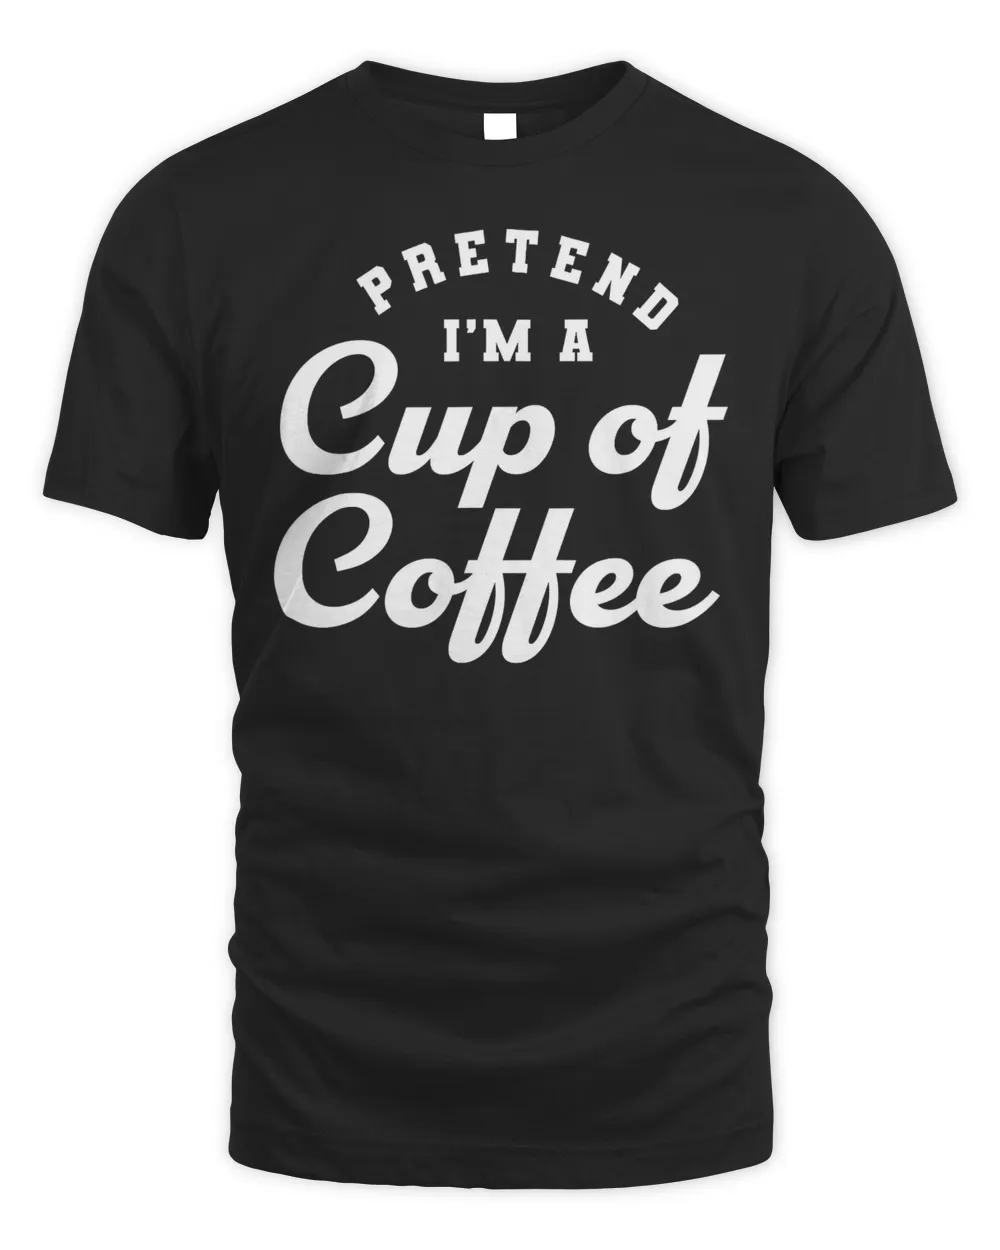 Pretend I&39;m A Cup of Coffee Easy Halloween Costume T-Shirt